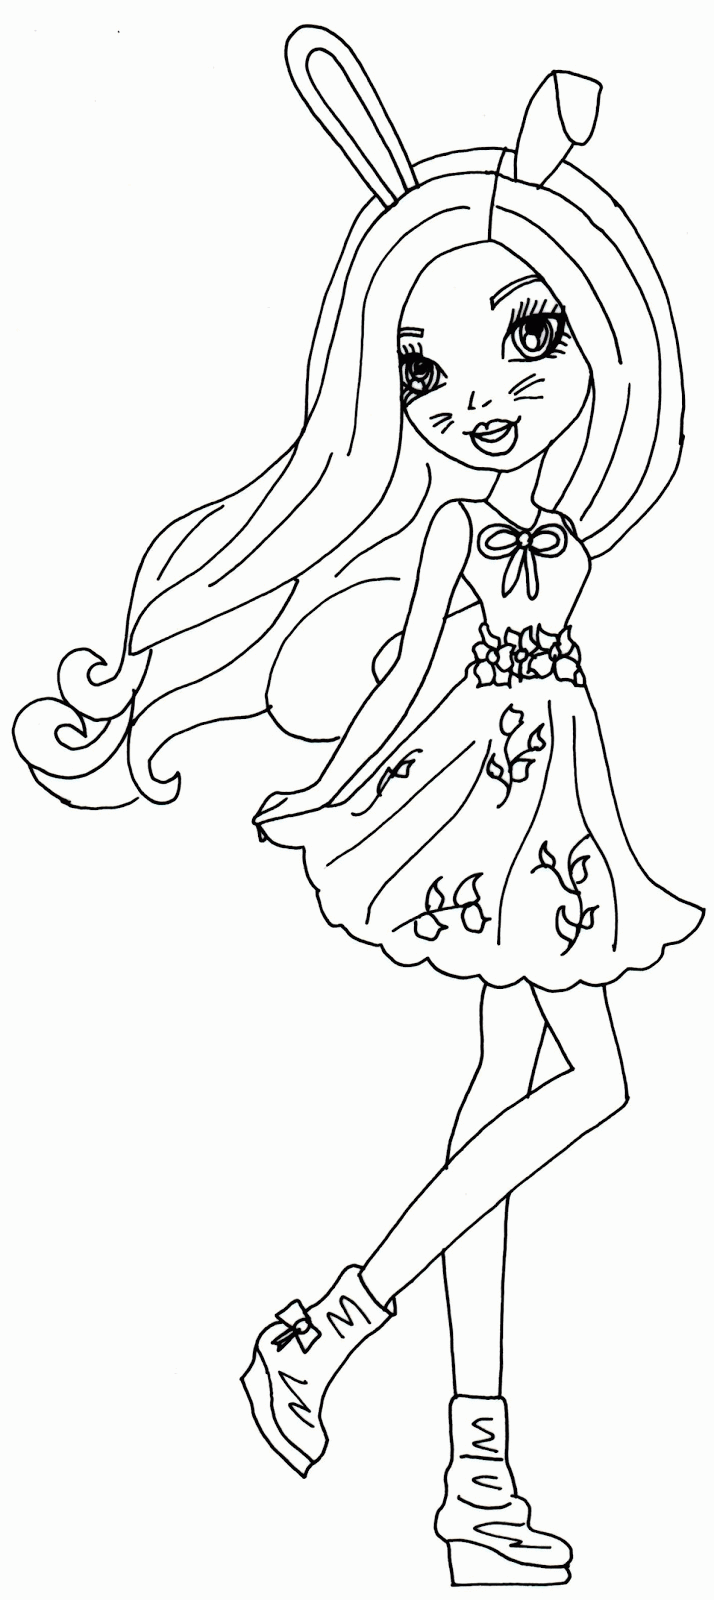 Free Printable Ever After High Coloring Pages: Harelow Ever After